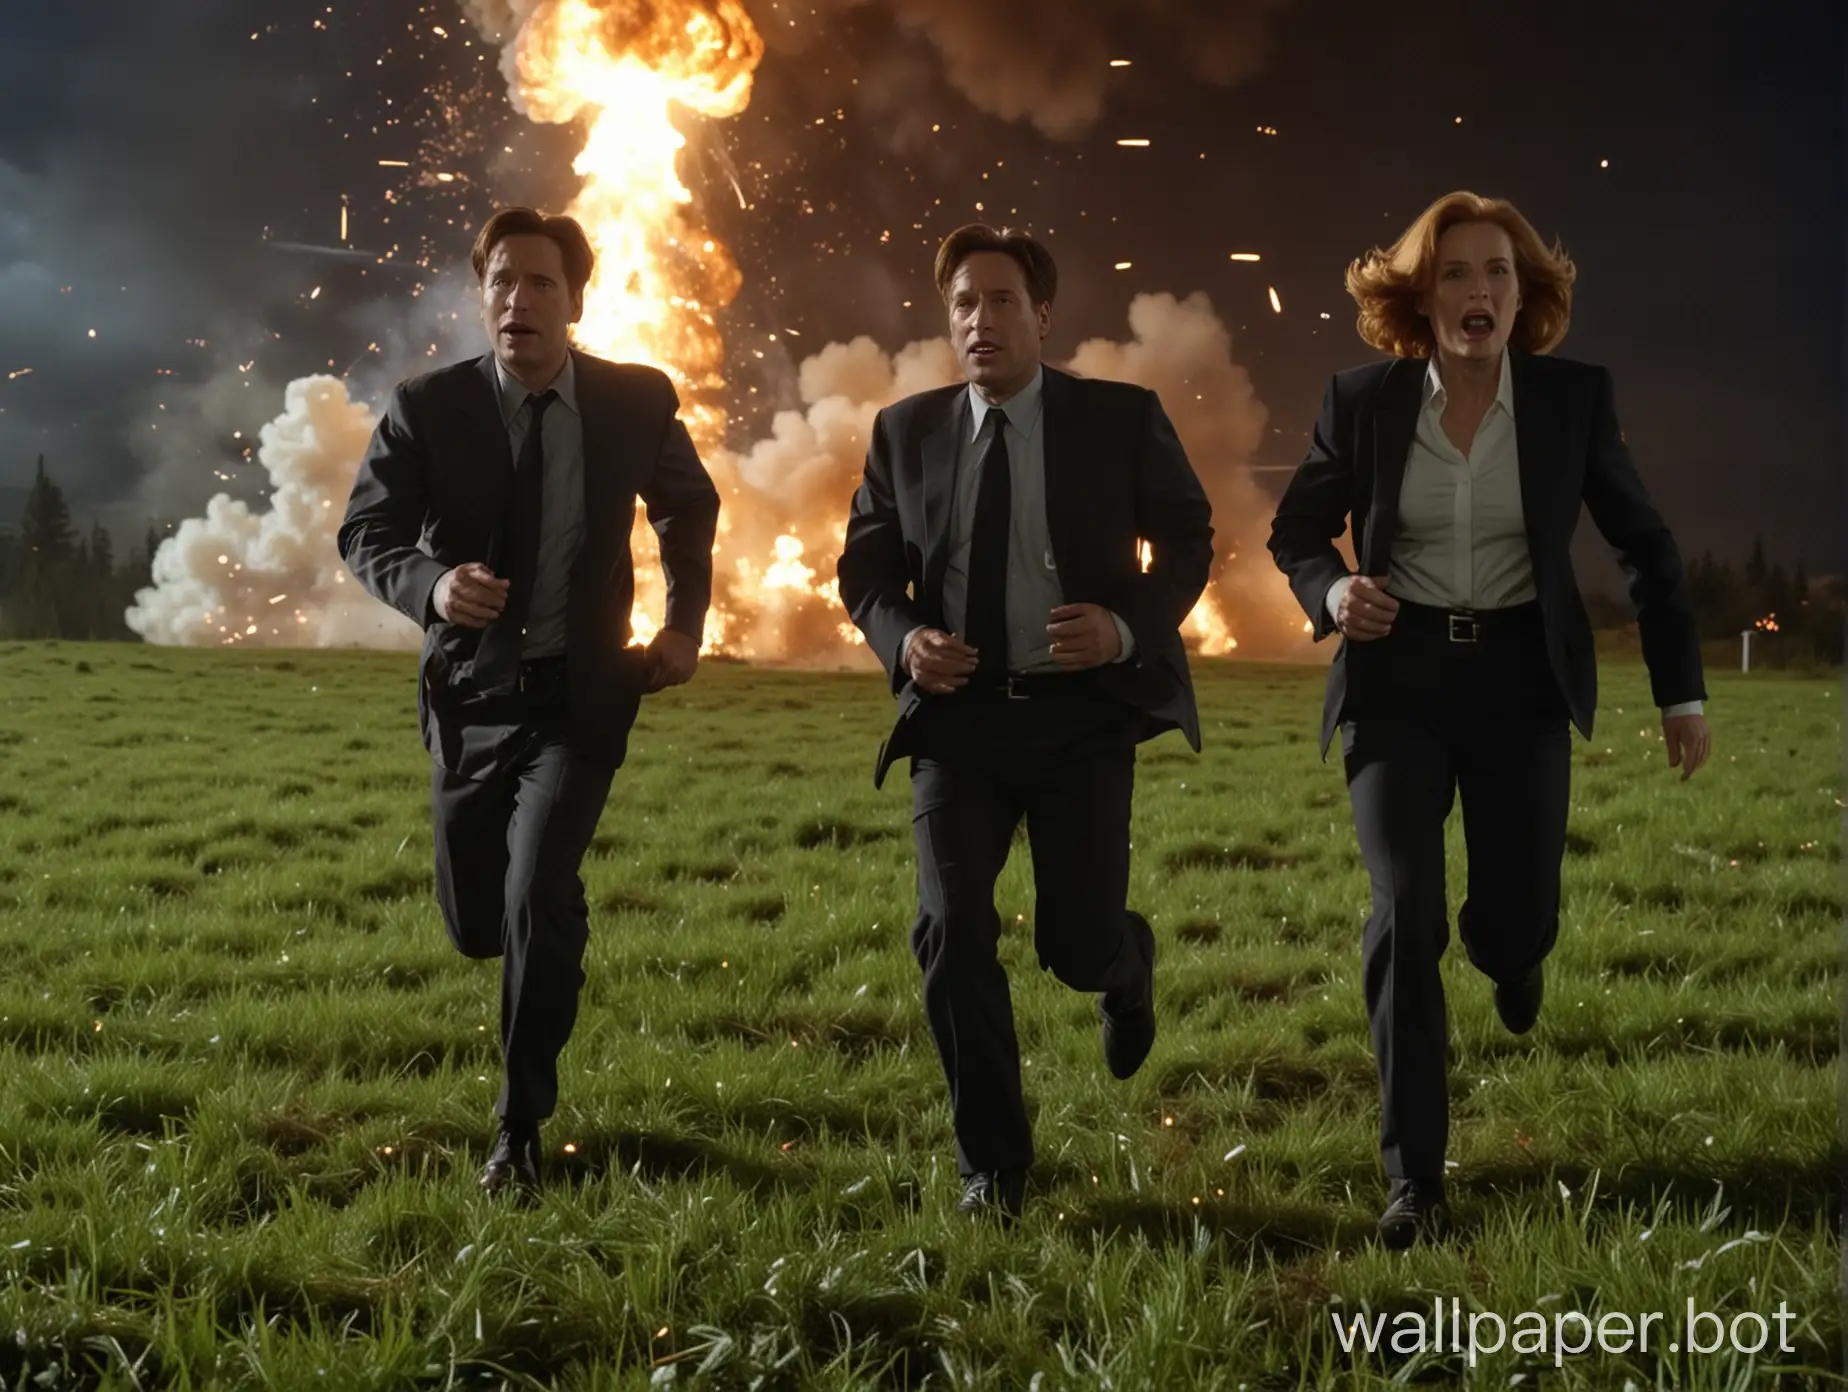 Mulder and Scully from the X-Files are running away from a spaceship on a grassy field at night with explosions in the background